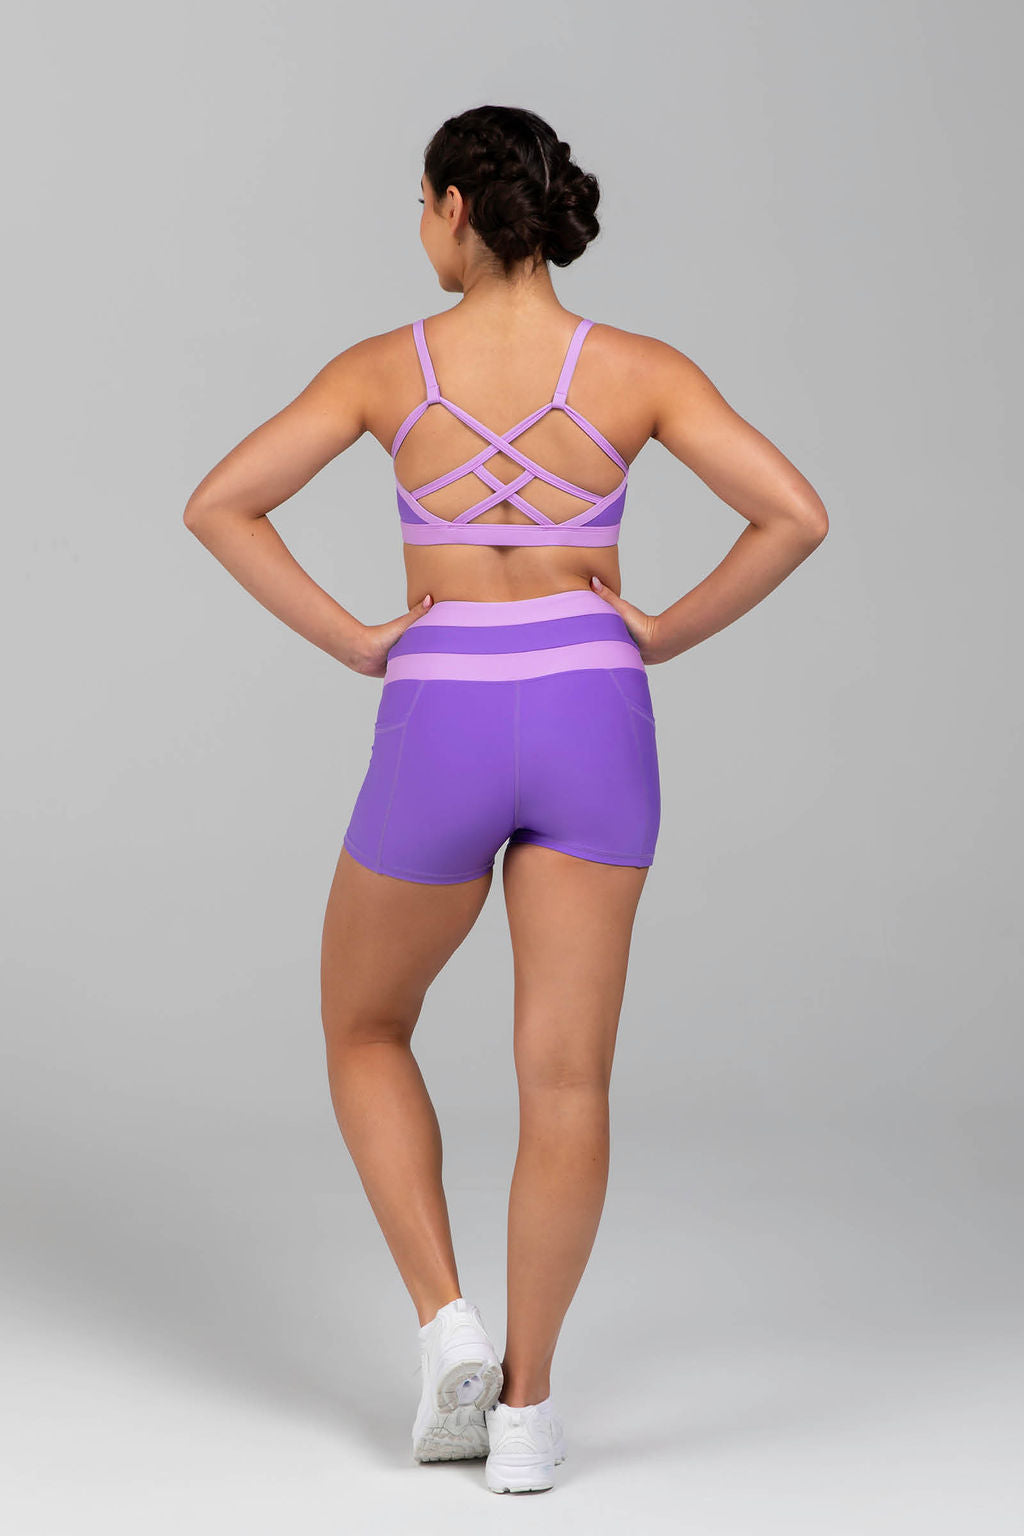 Happiness Thin Strap Criss-Cross Crop Top Girls - Lilac